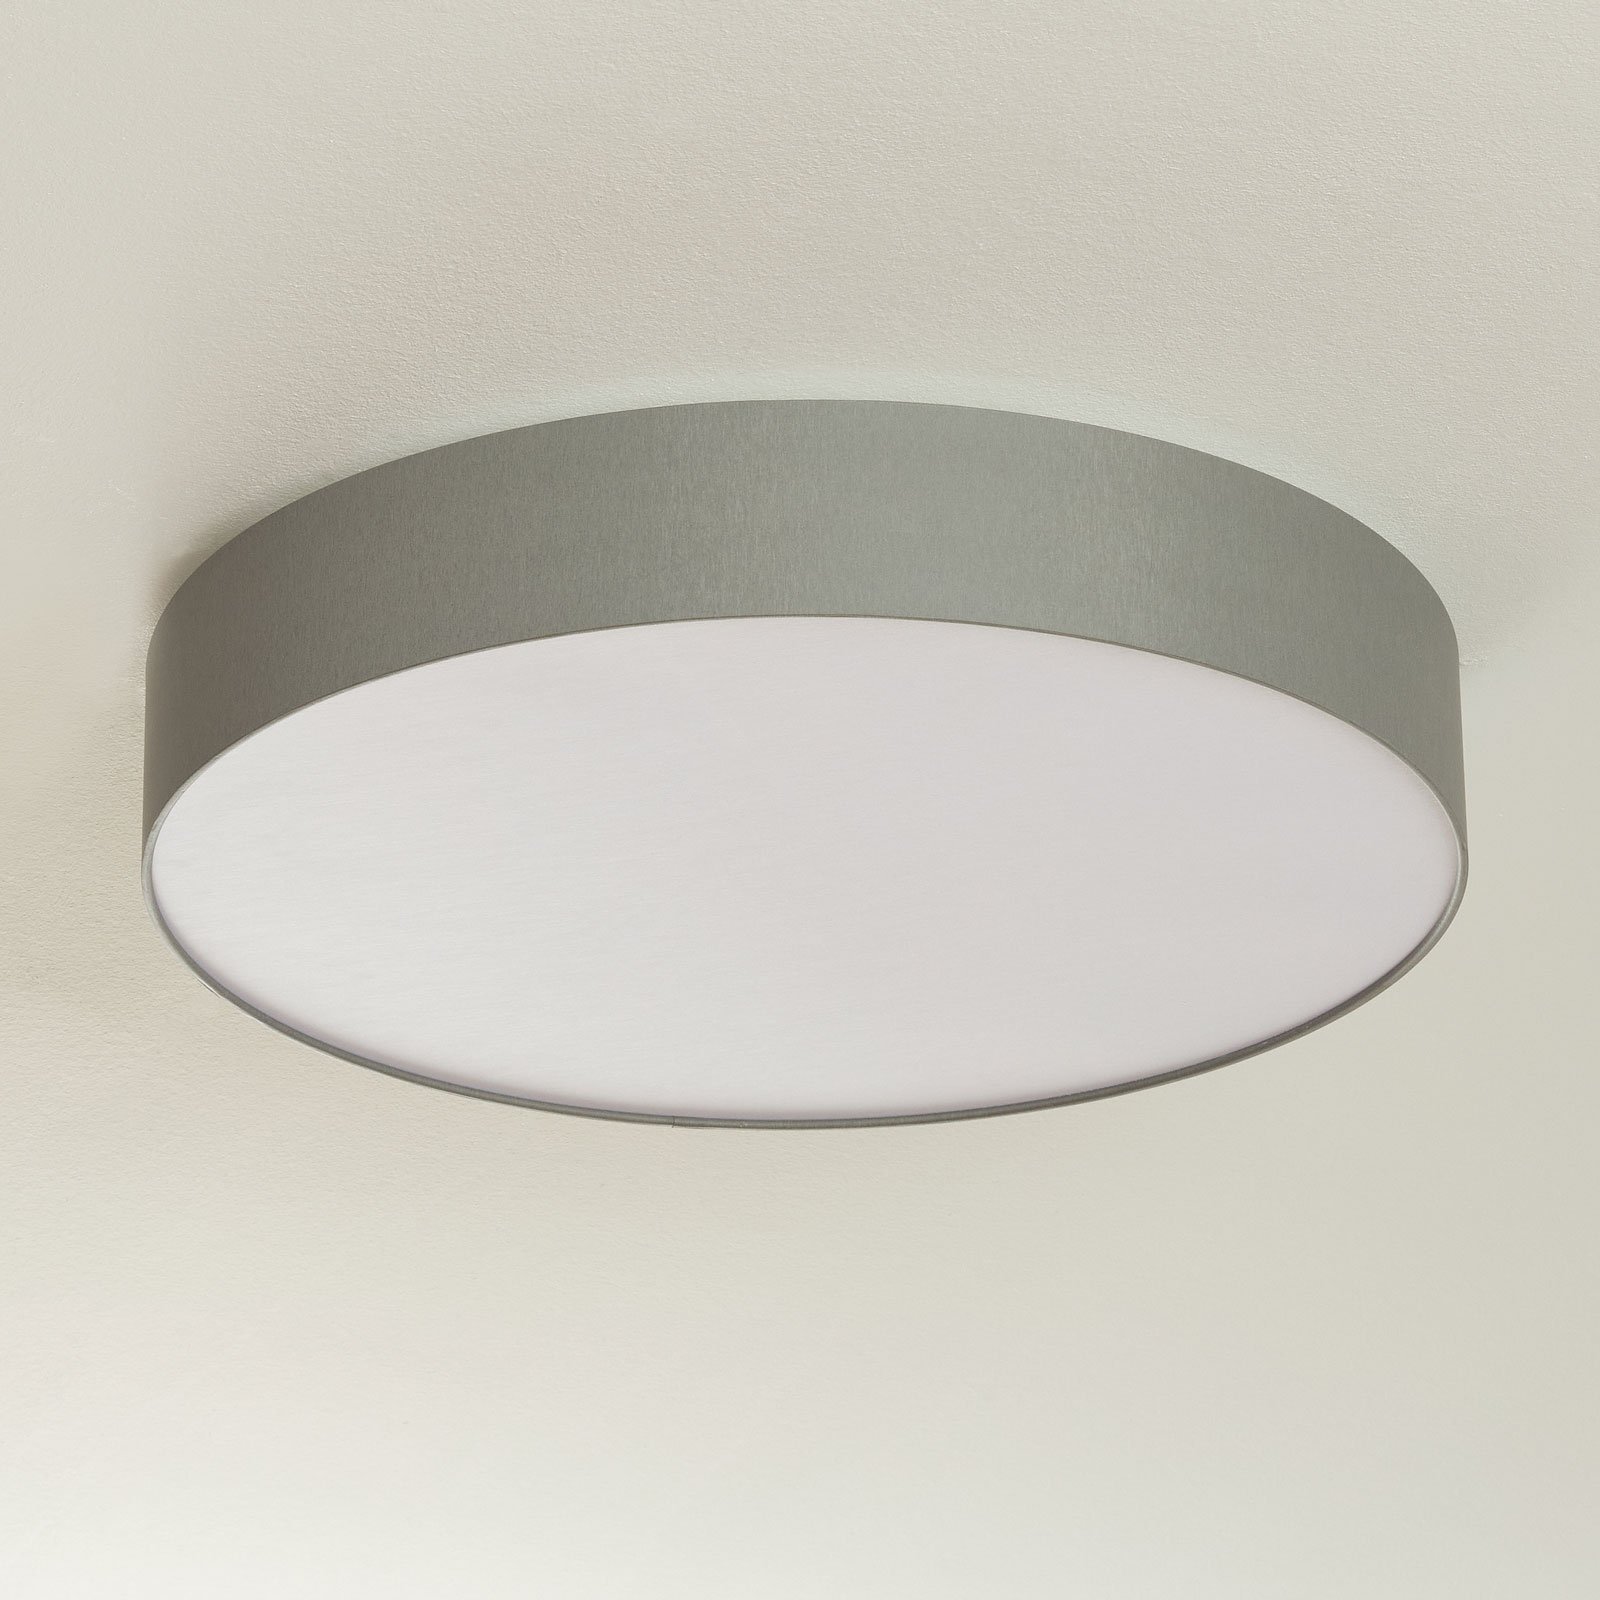 Plafonnier LED Luno dimmable, gris clair